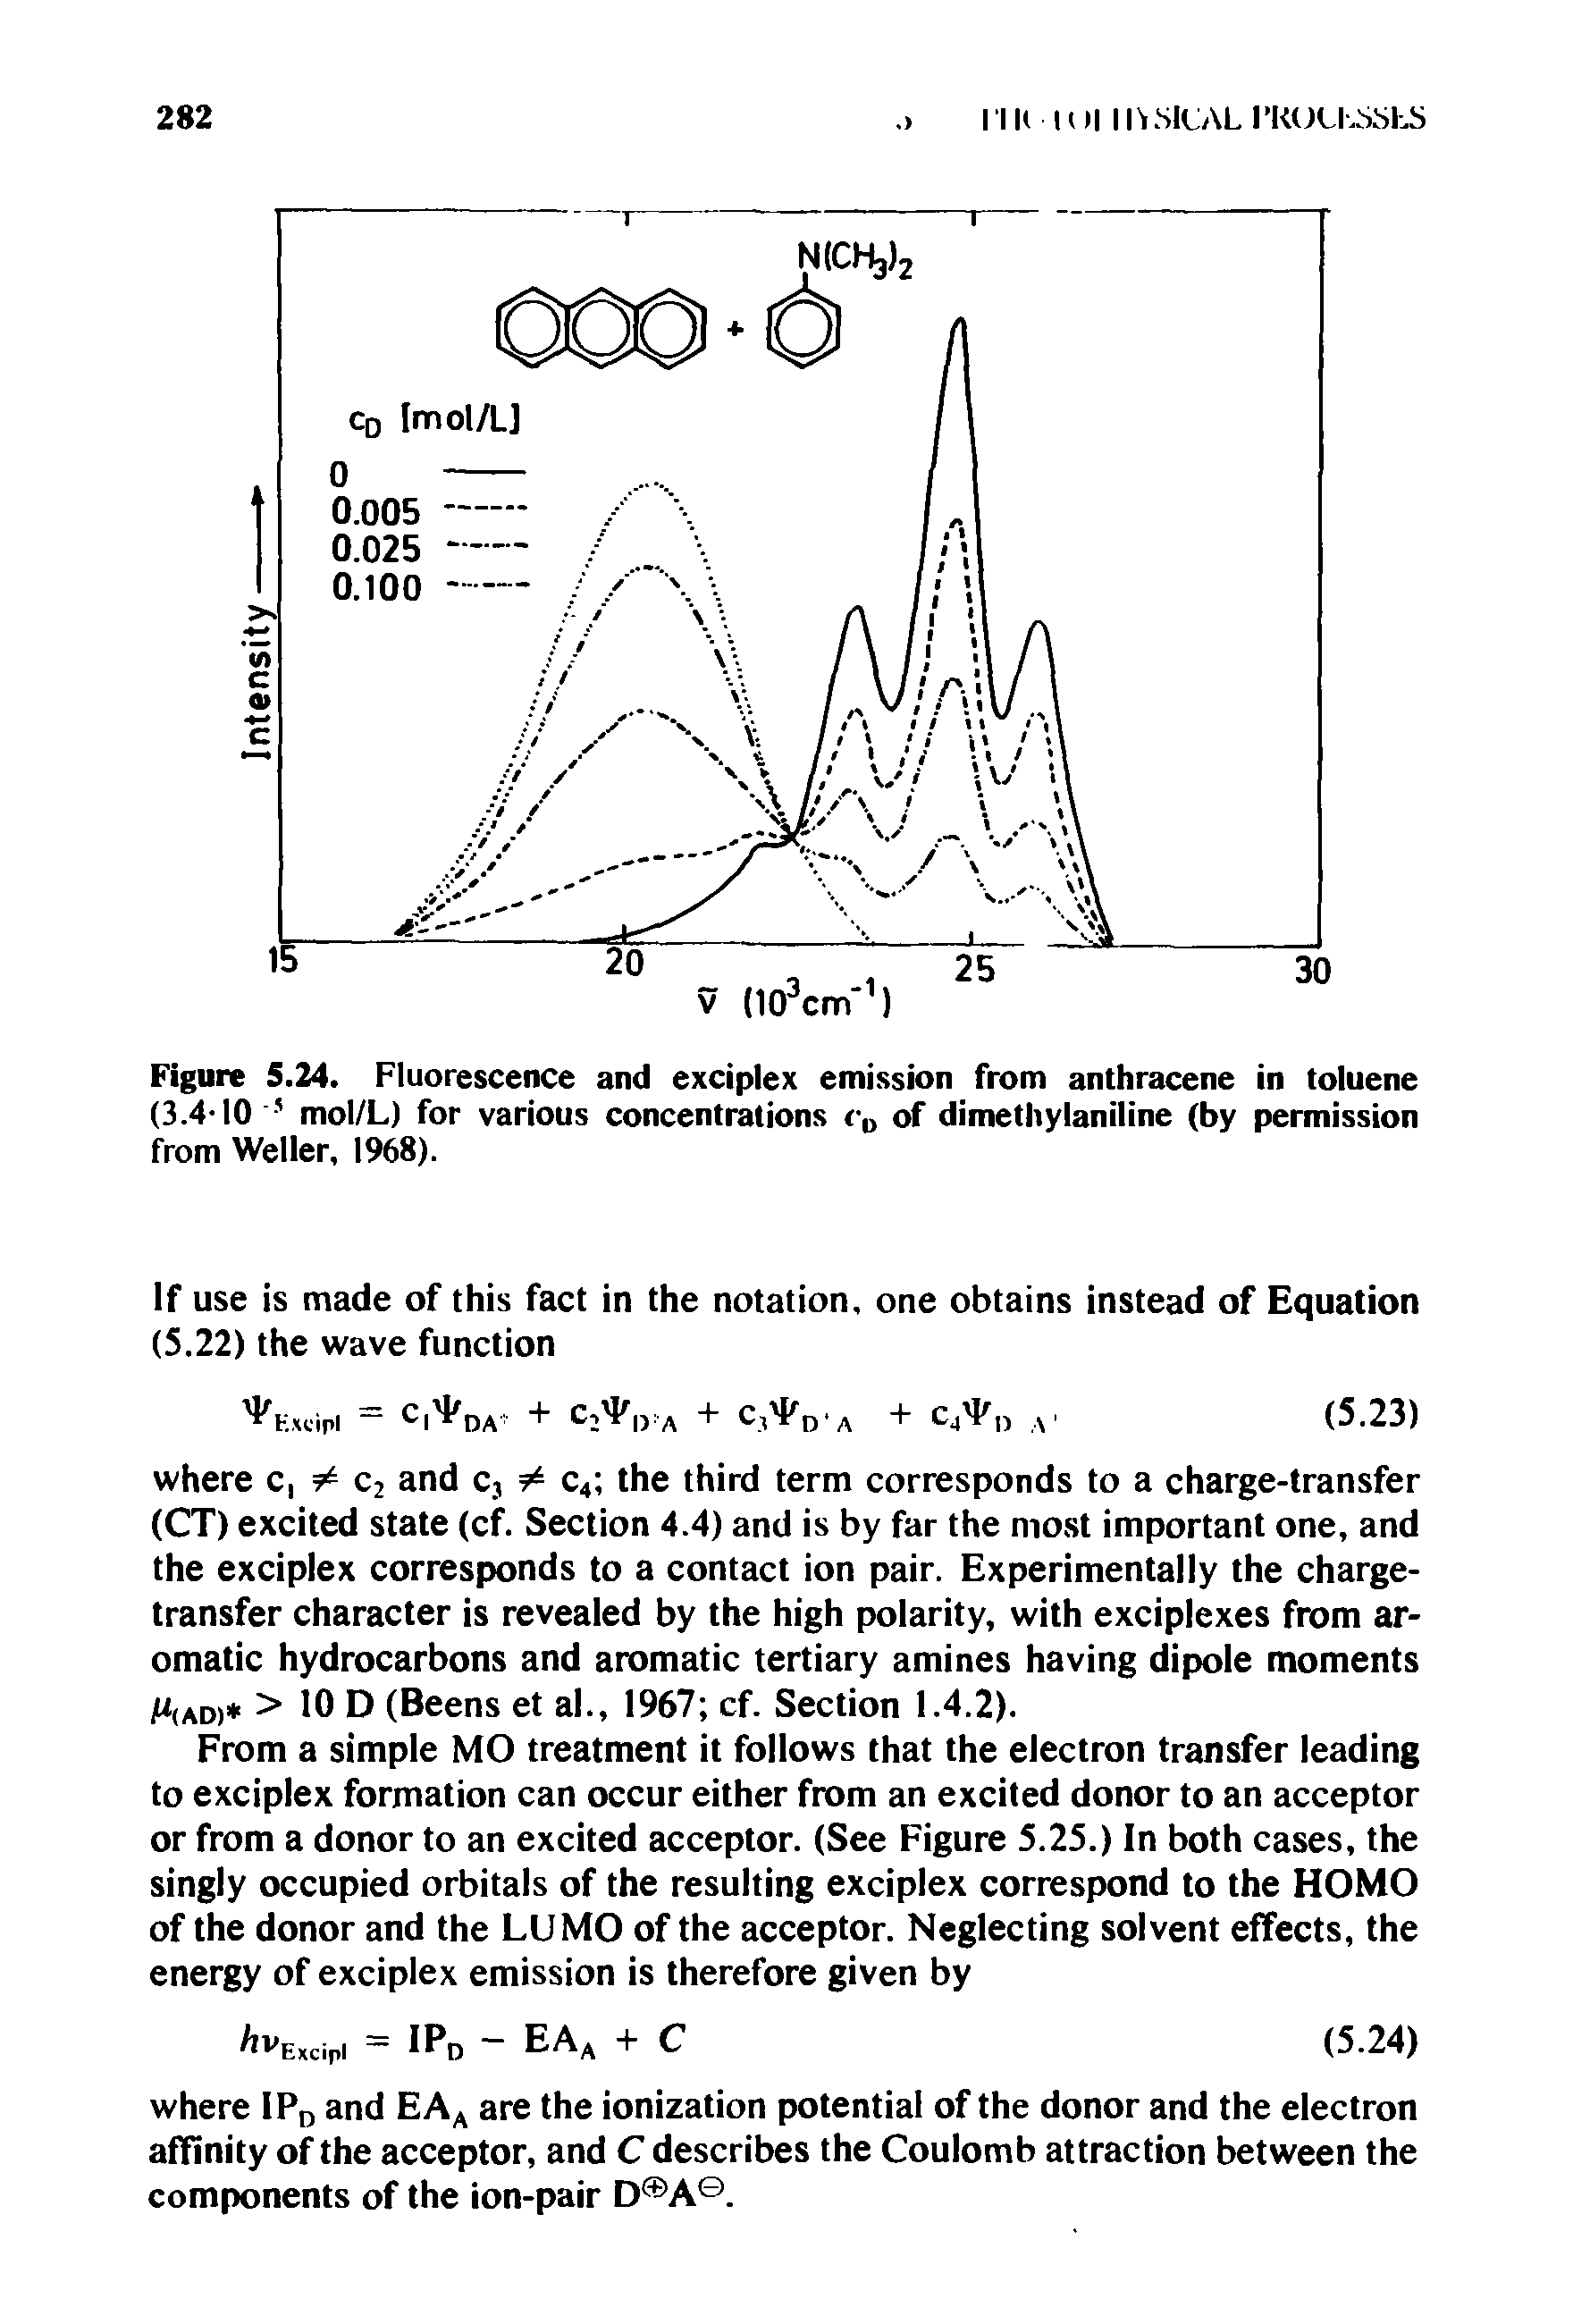 Figure 5.24. Fluorescence and exciplex emission from anthracene in toluene (3.4-10 mol/L) for various concentrations Cq of dimethylaniline (by permission from Weller, 1968).